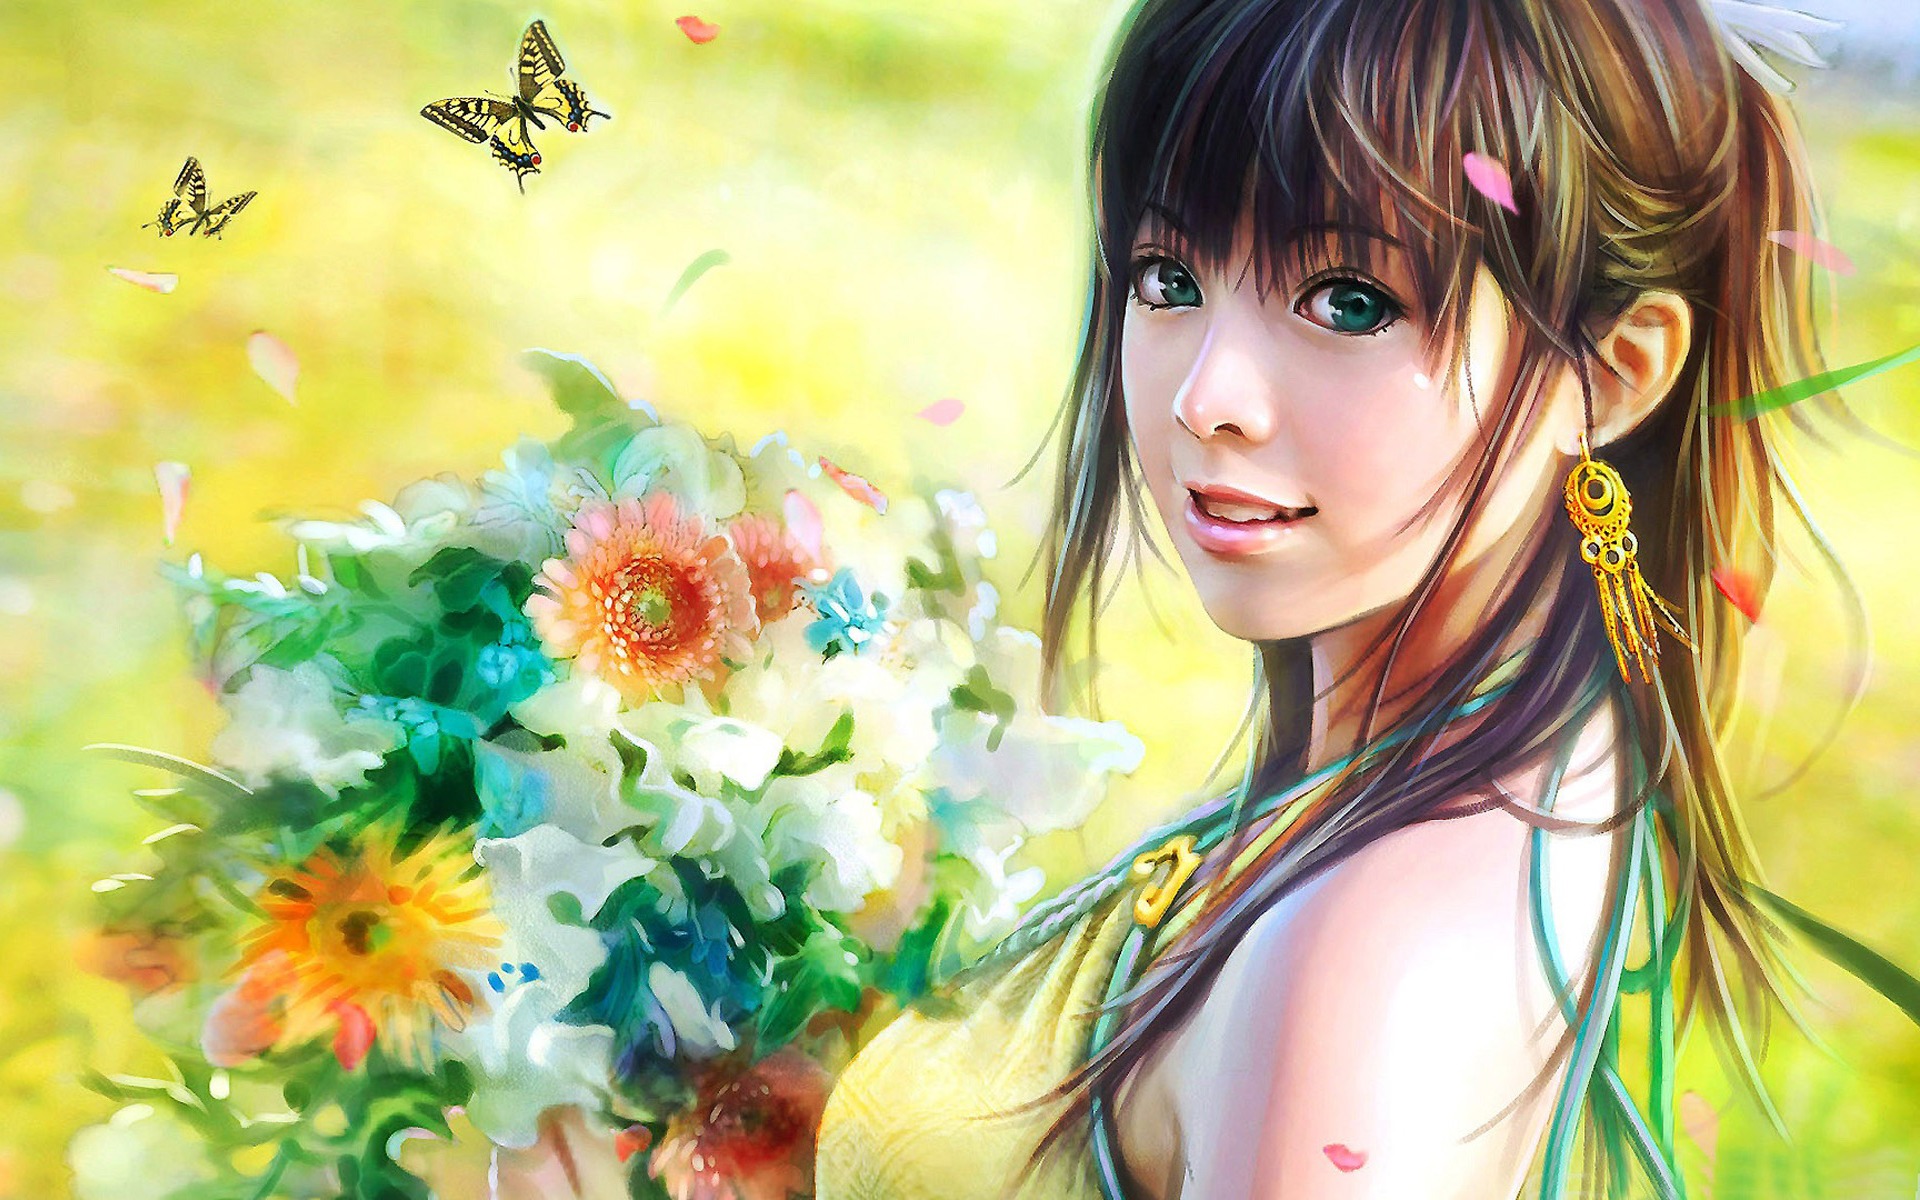 Smiling girl Amazing Artistic Painting Wallpaper - 1920x1200